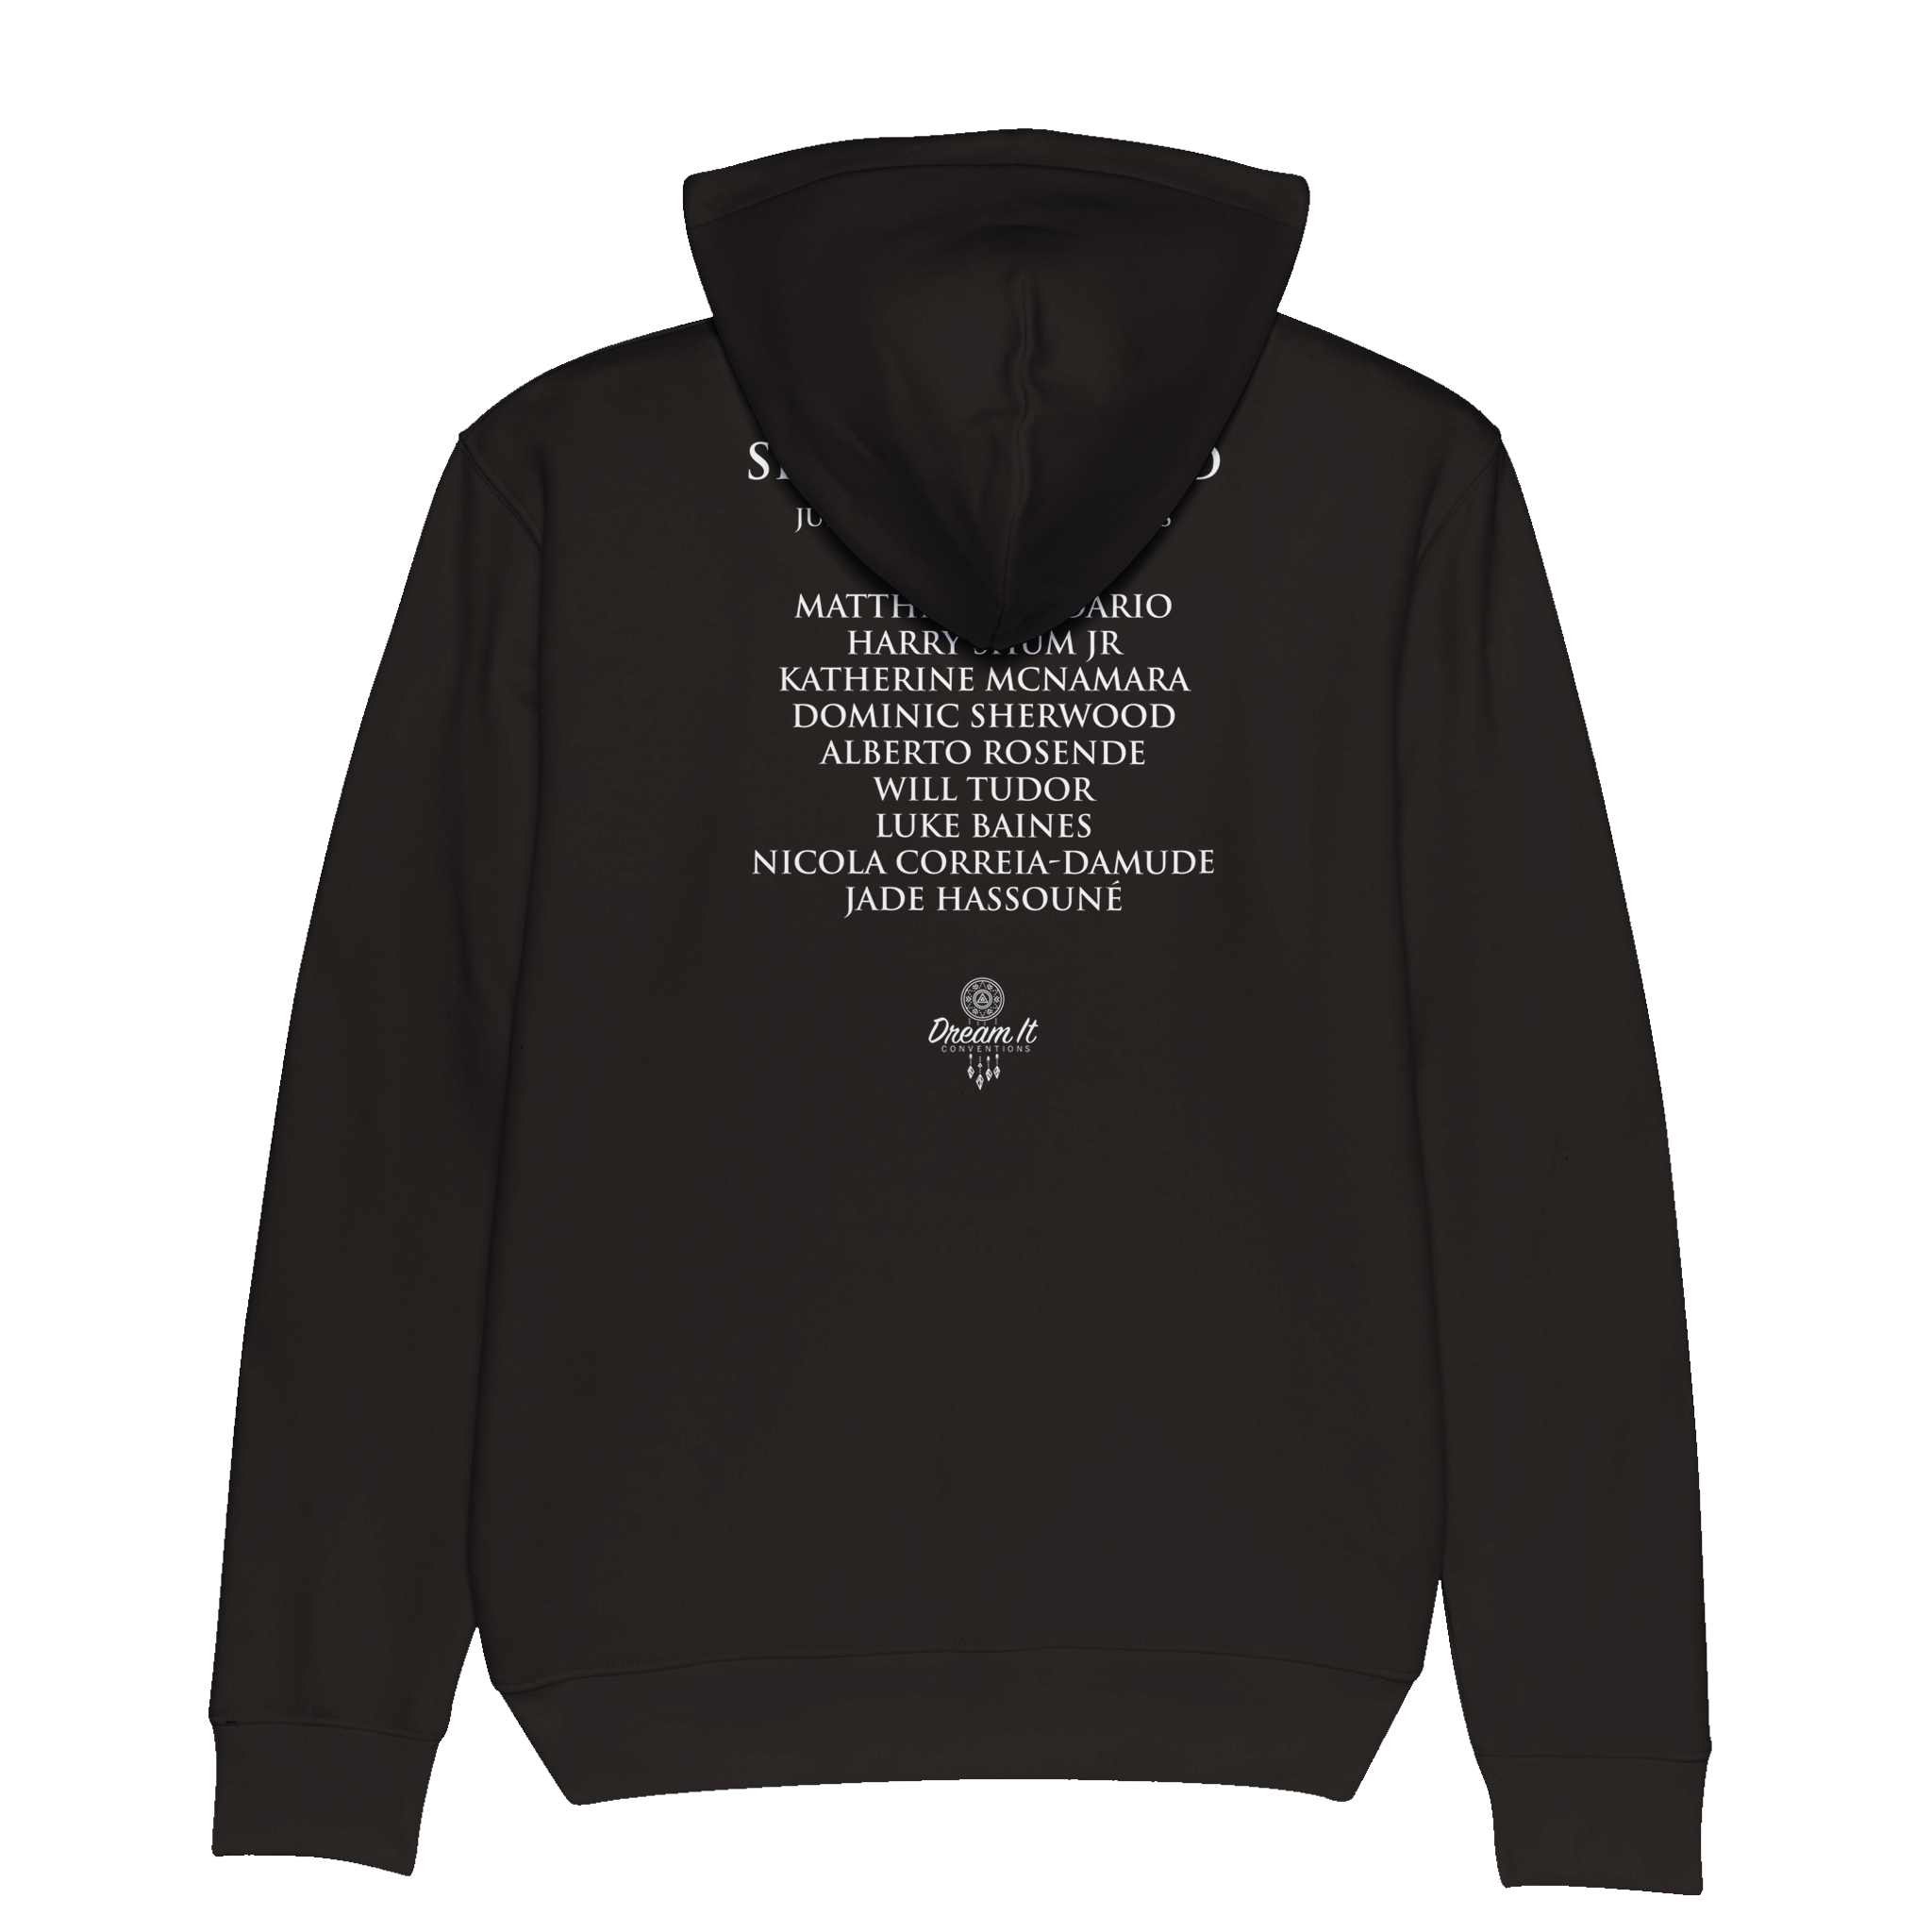 ENTER THE SHADOW WORLD OFFICIAL Organic Unisex Hoodie